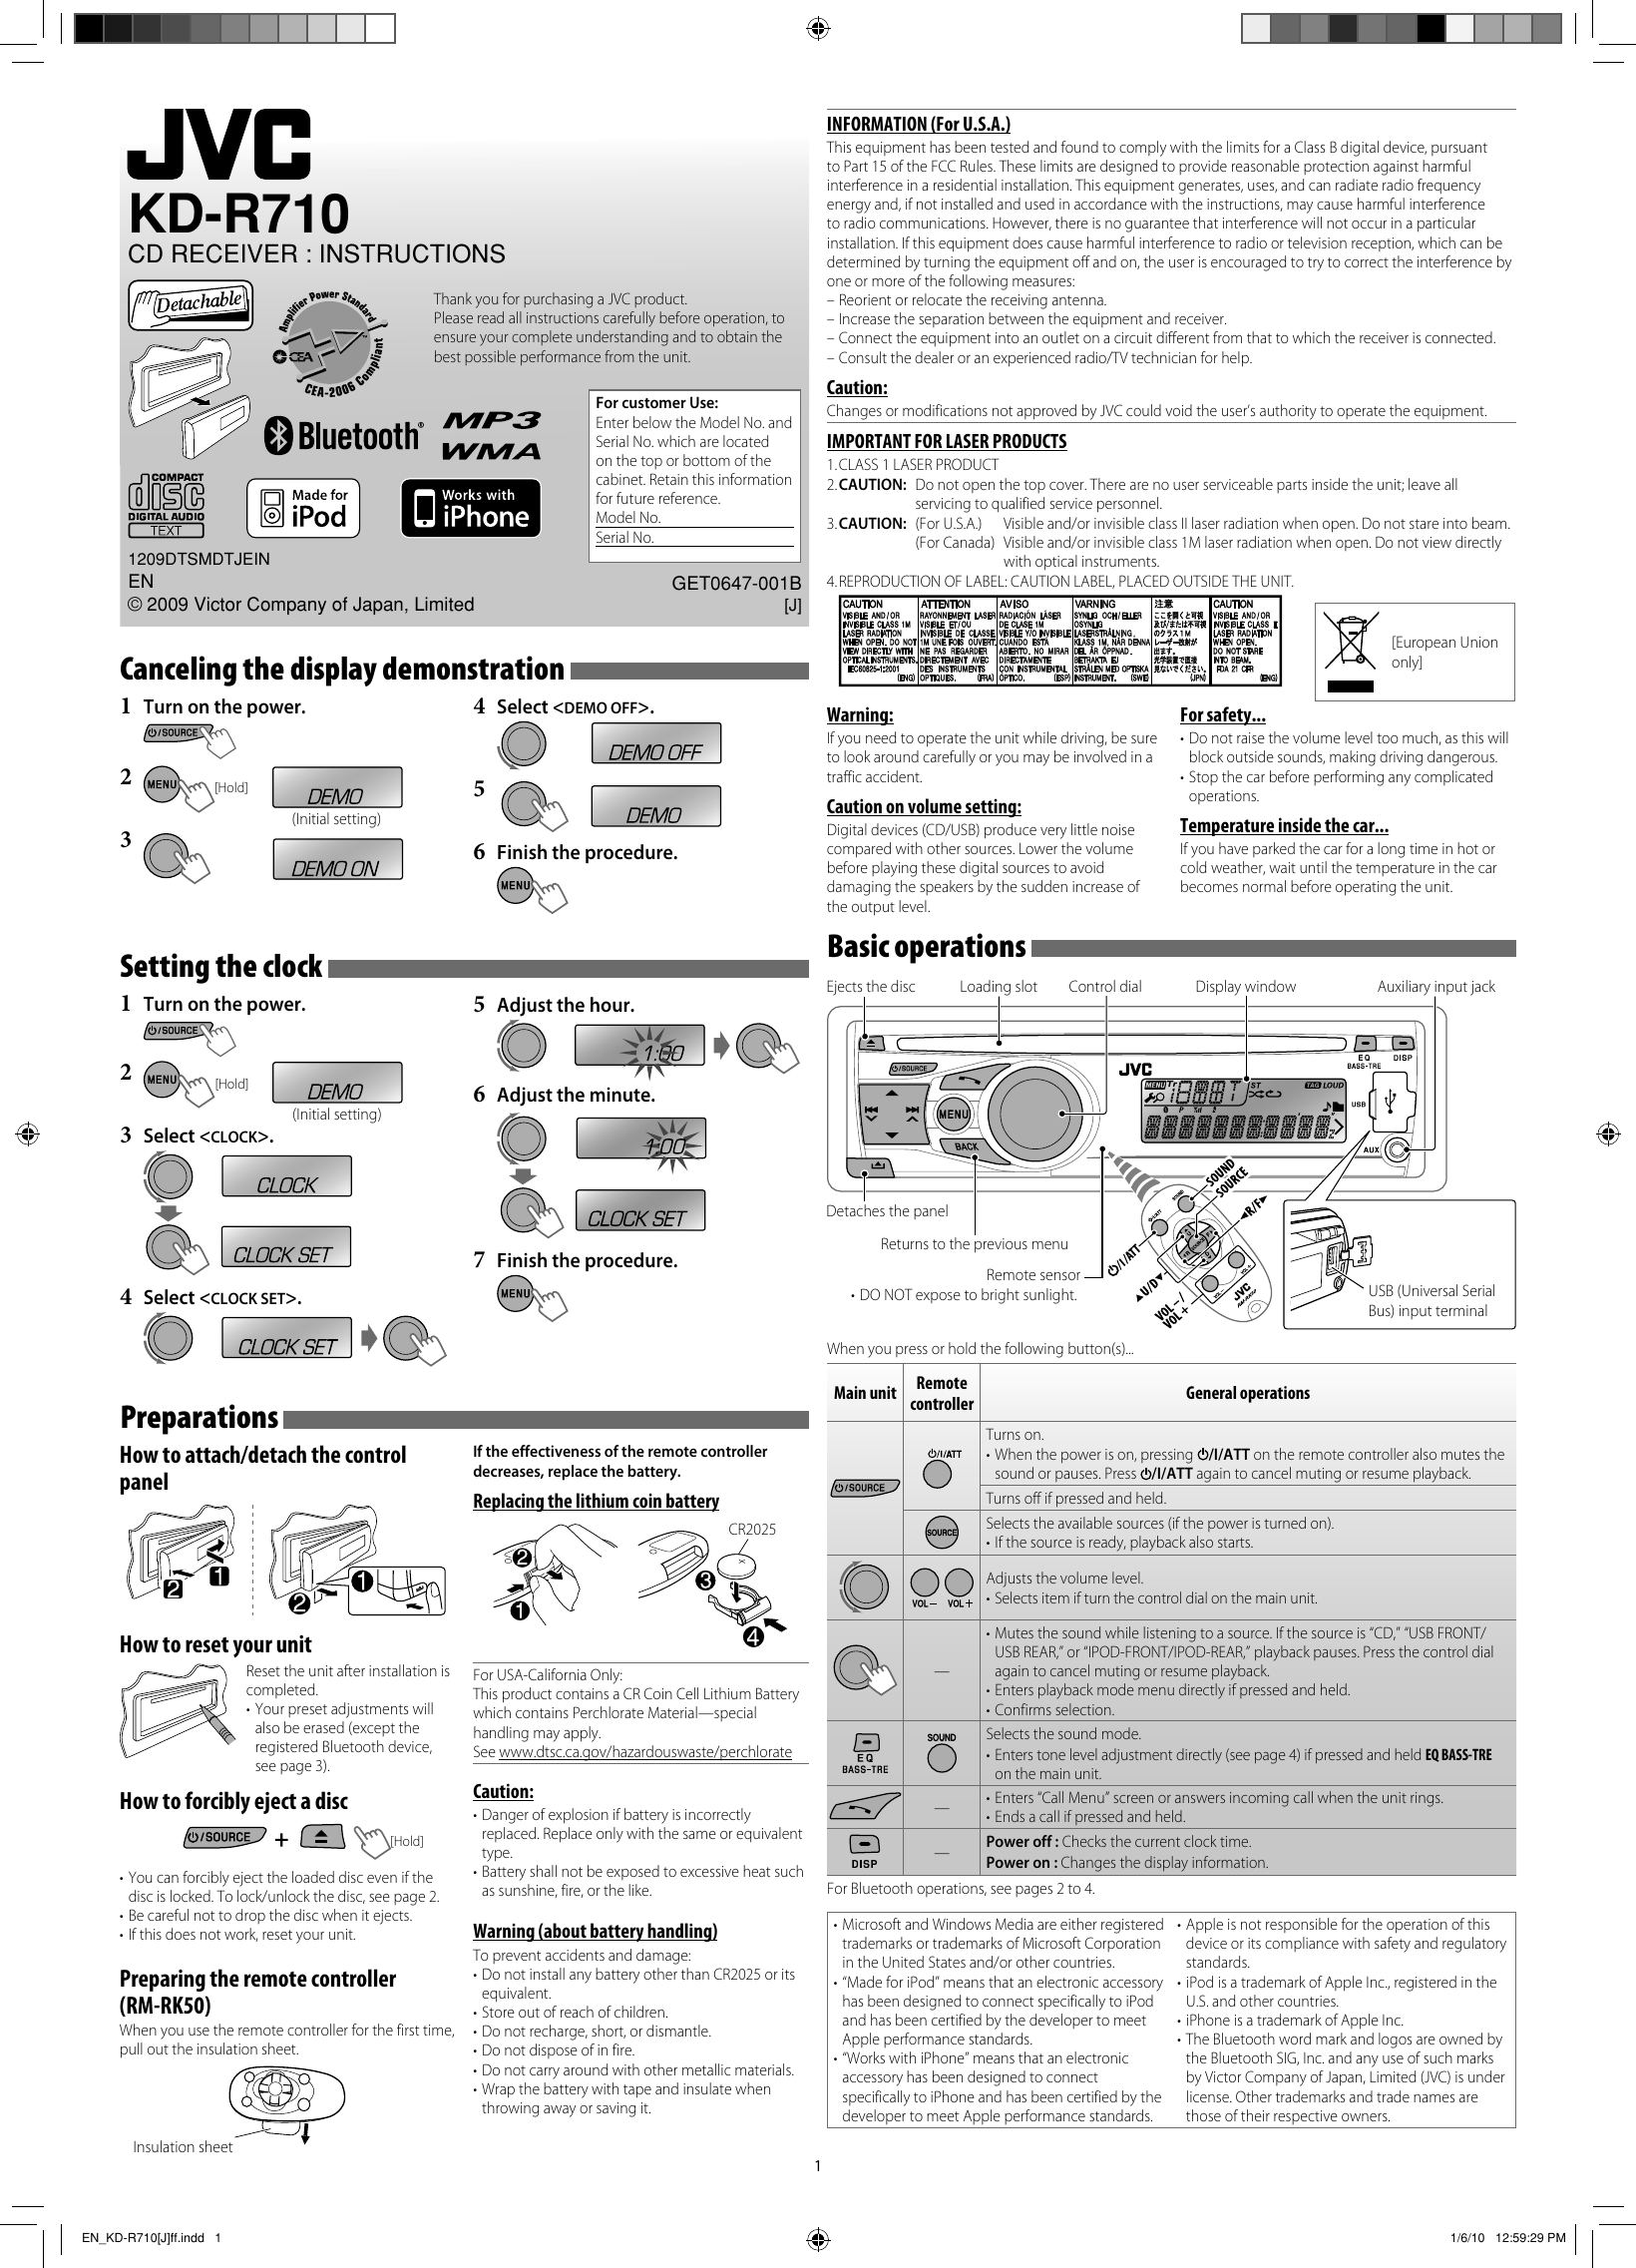 Page 1 of 8 - Jvc Jvc-Car-Stereo-System-Kd-R710-Users-Manual- EN_KD-R710[J]f  Jvc-car-stereo-system-kd-r710-users-manual